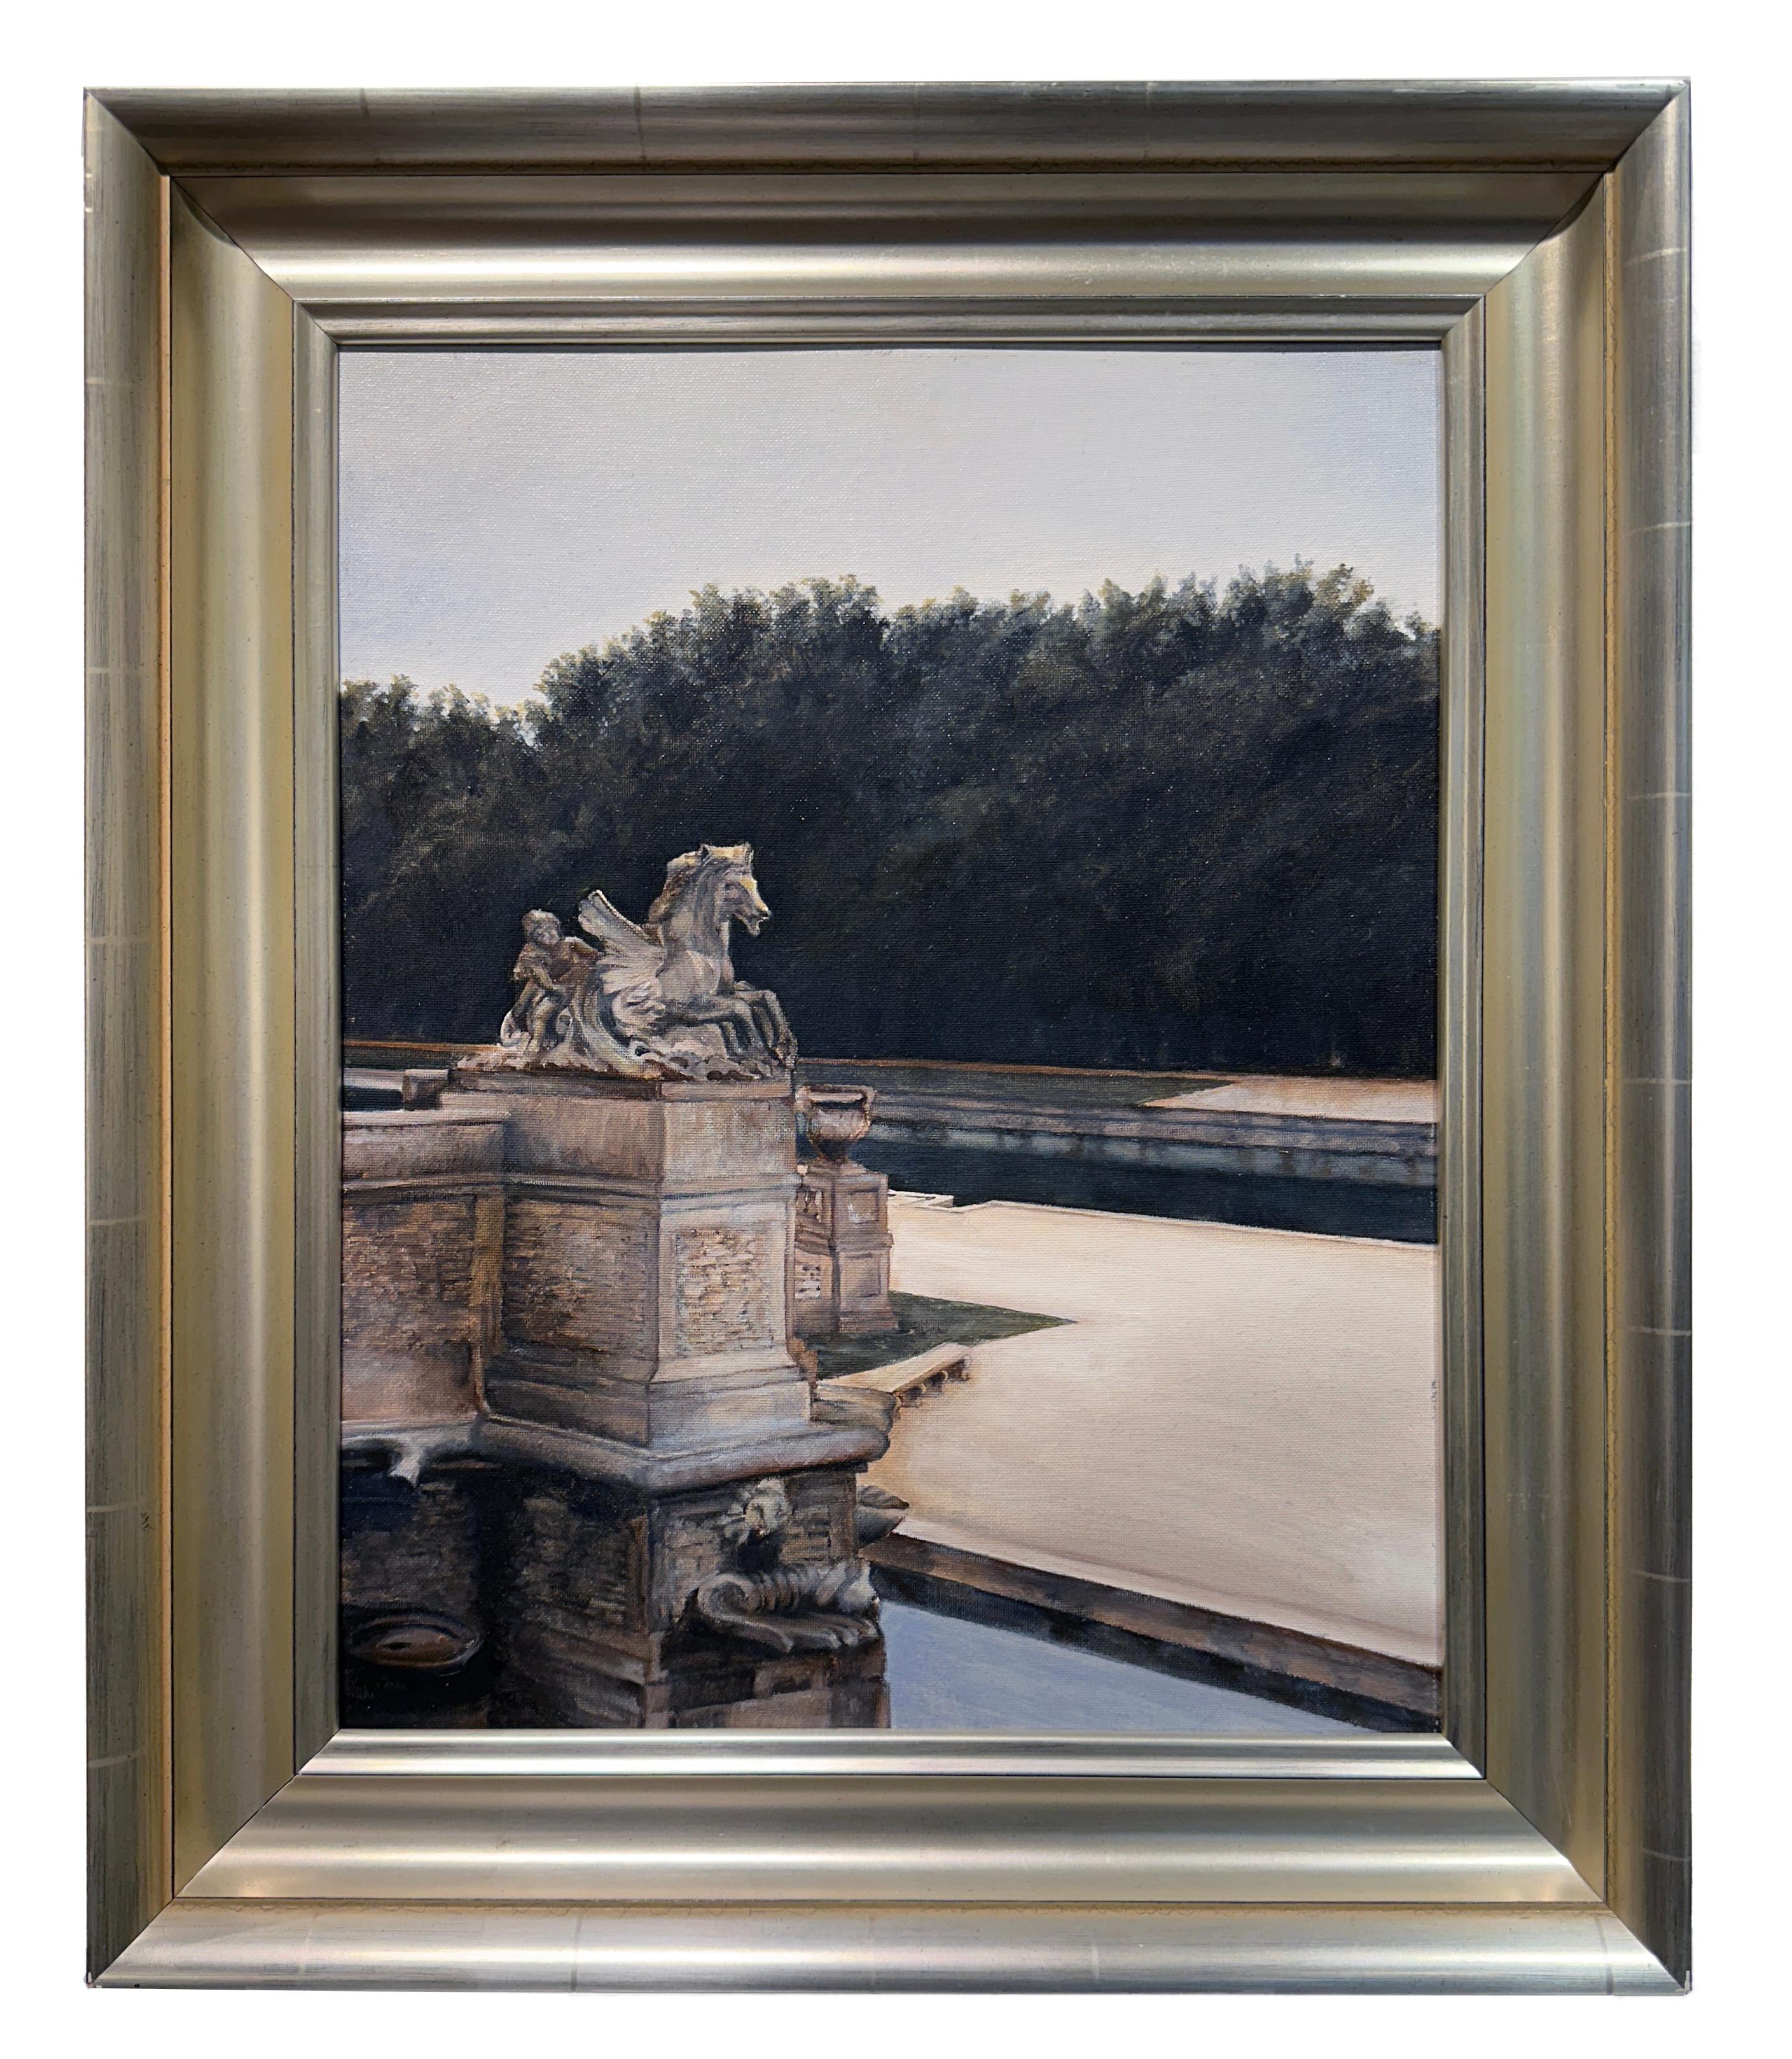 Richard Gibbons Landscape Painting - Charioteau - French Landscape with Garden Sculpture & Reflecting Pond, Framed